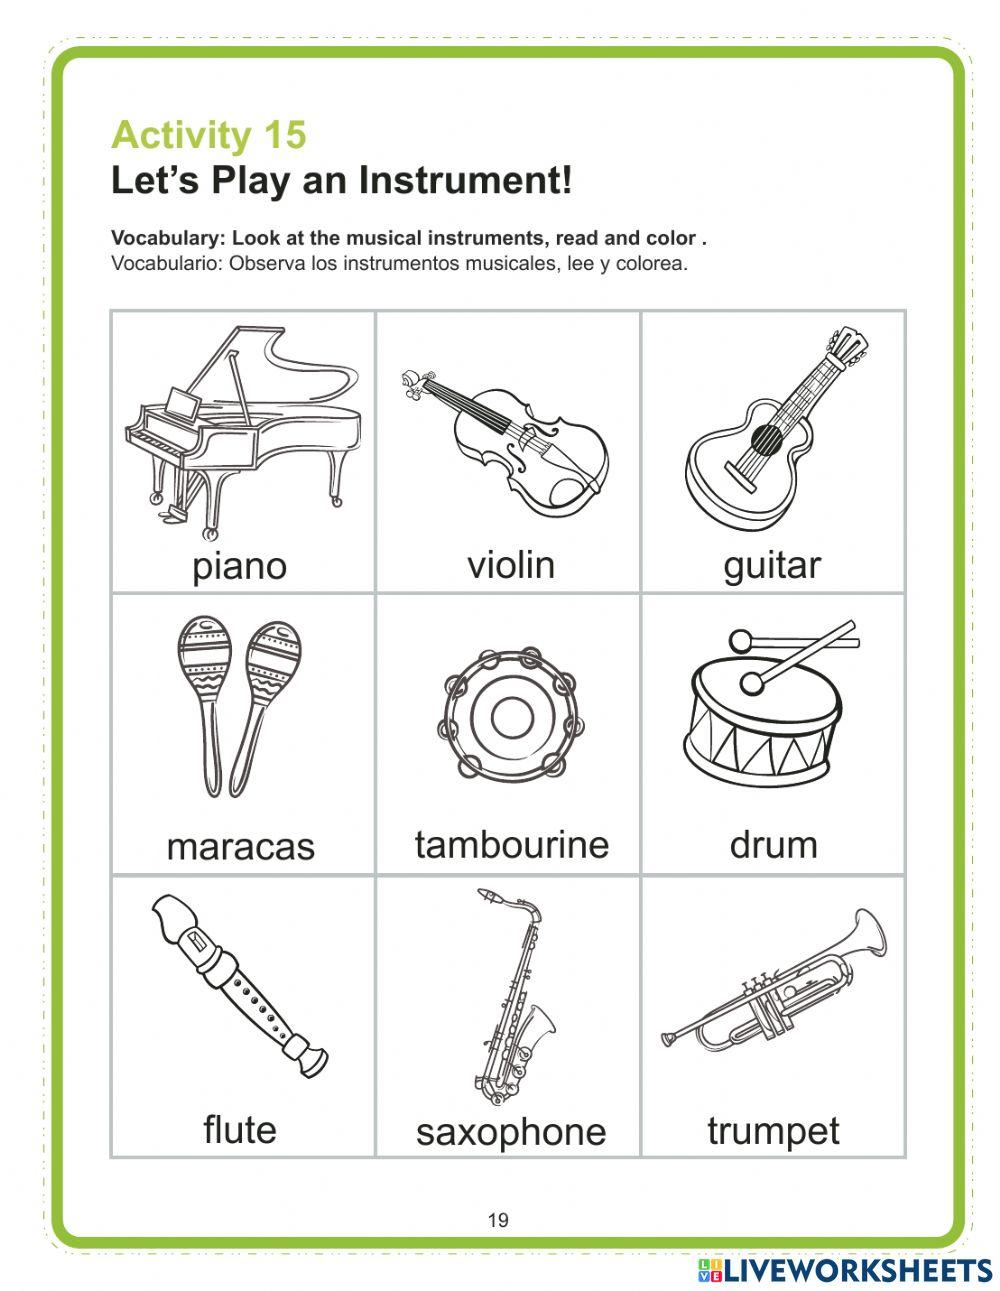 Let’s Play an Instrument!